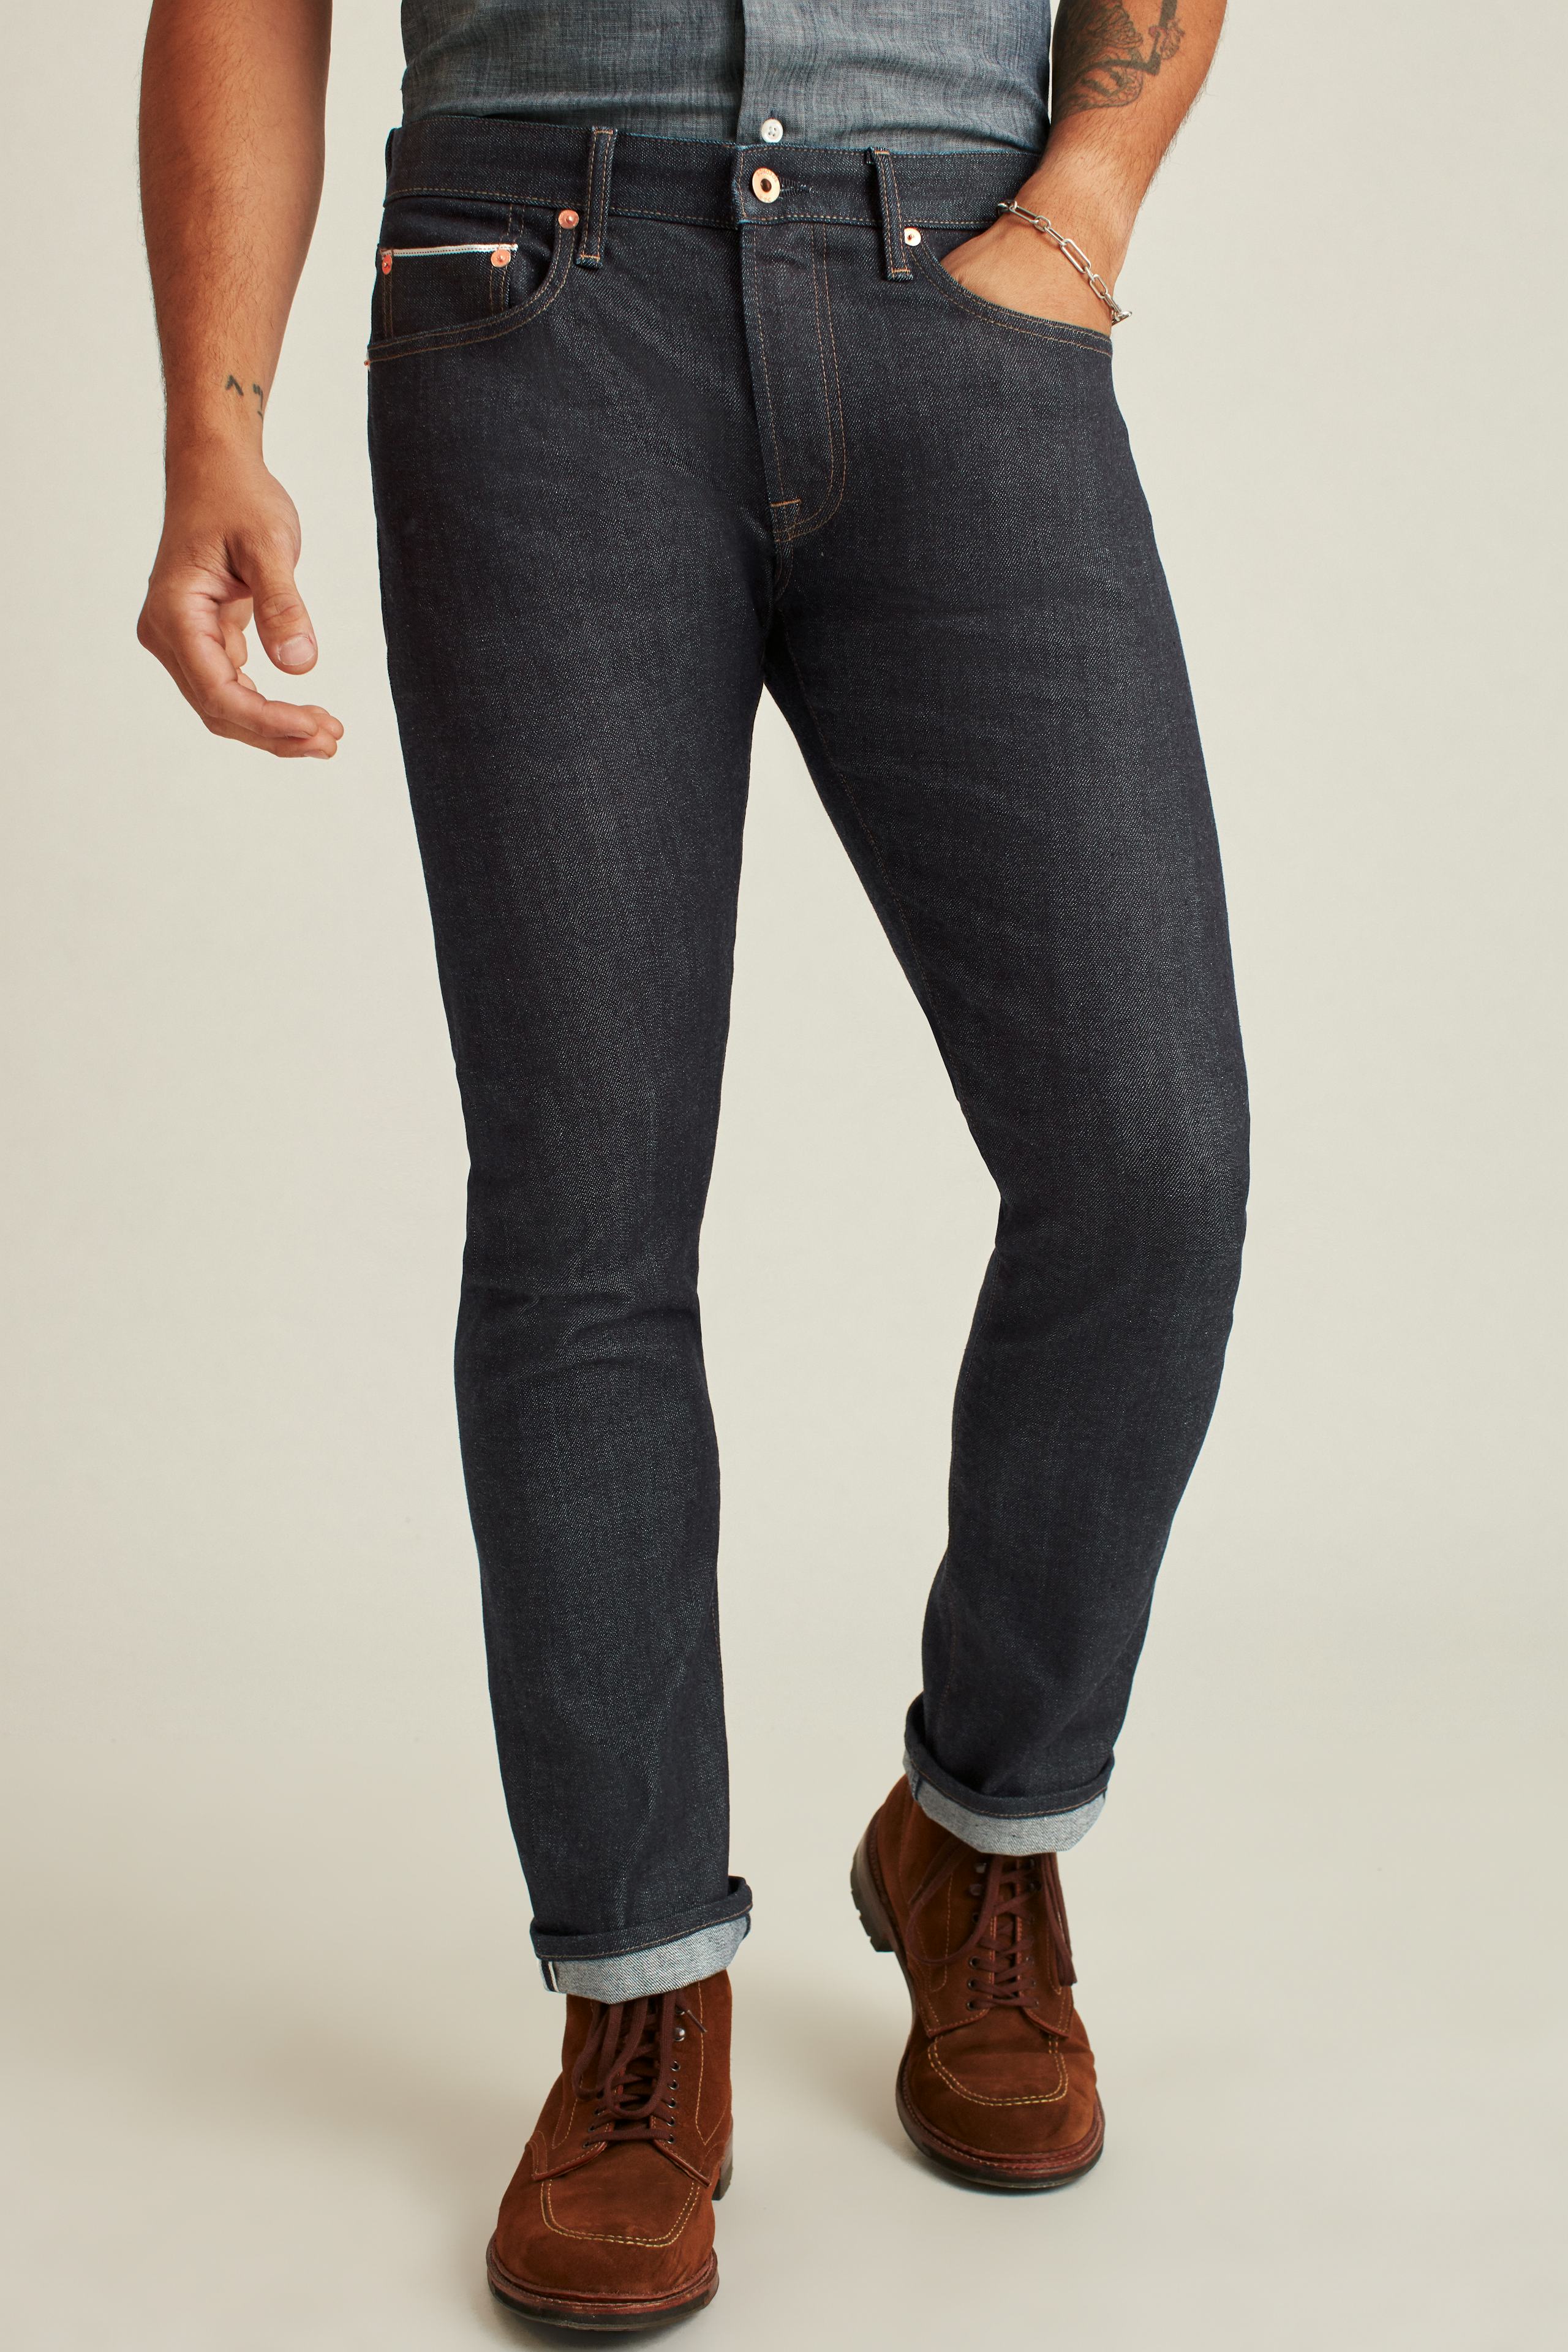 Selvage Stretch Jeans